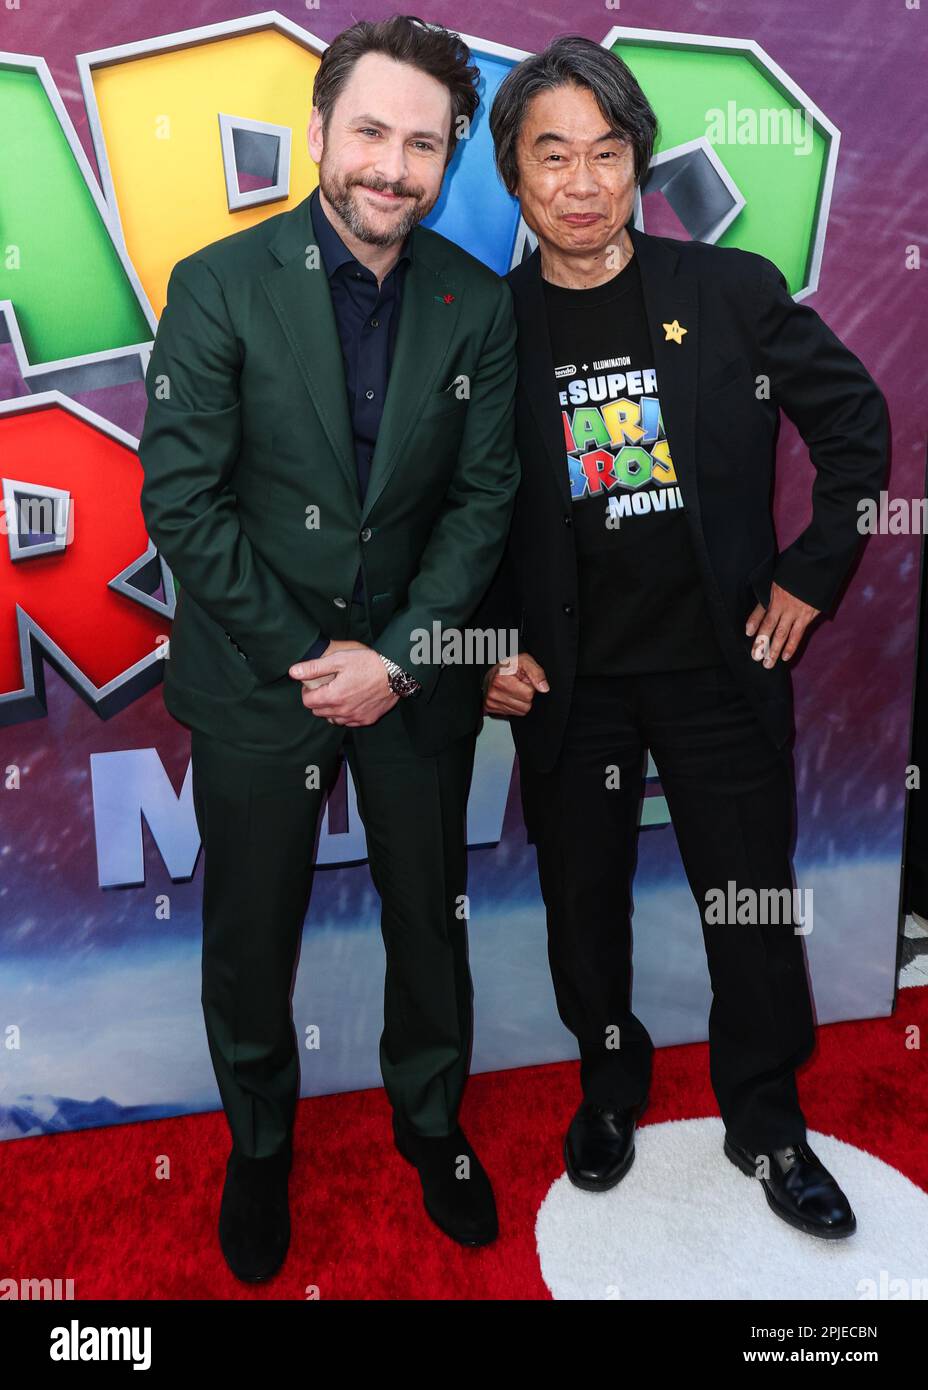 LOS ANGELES, CALIFORNIA, USA - APRIL 01: Charlie Day and Shigeru Miyamoto arrive at the Los Angeles Special Screening Of Universal Pictures, Nintendo And Illumination Entertainment's 'The Super Mario Bros. Movie' held at the Regal Cinemas LA Live & 4DX Movie on April 1, 2023 in Los Angeles, California, United States. (Photo by Xavier Collin/Image Press Agency) Stock Photo